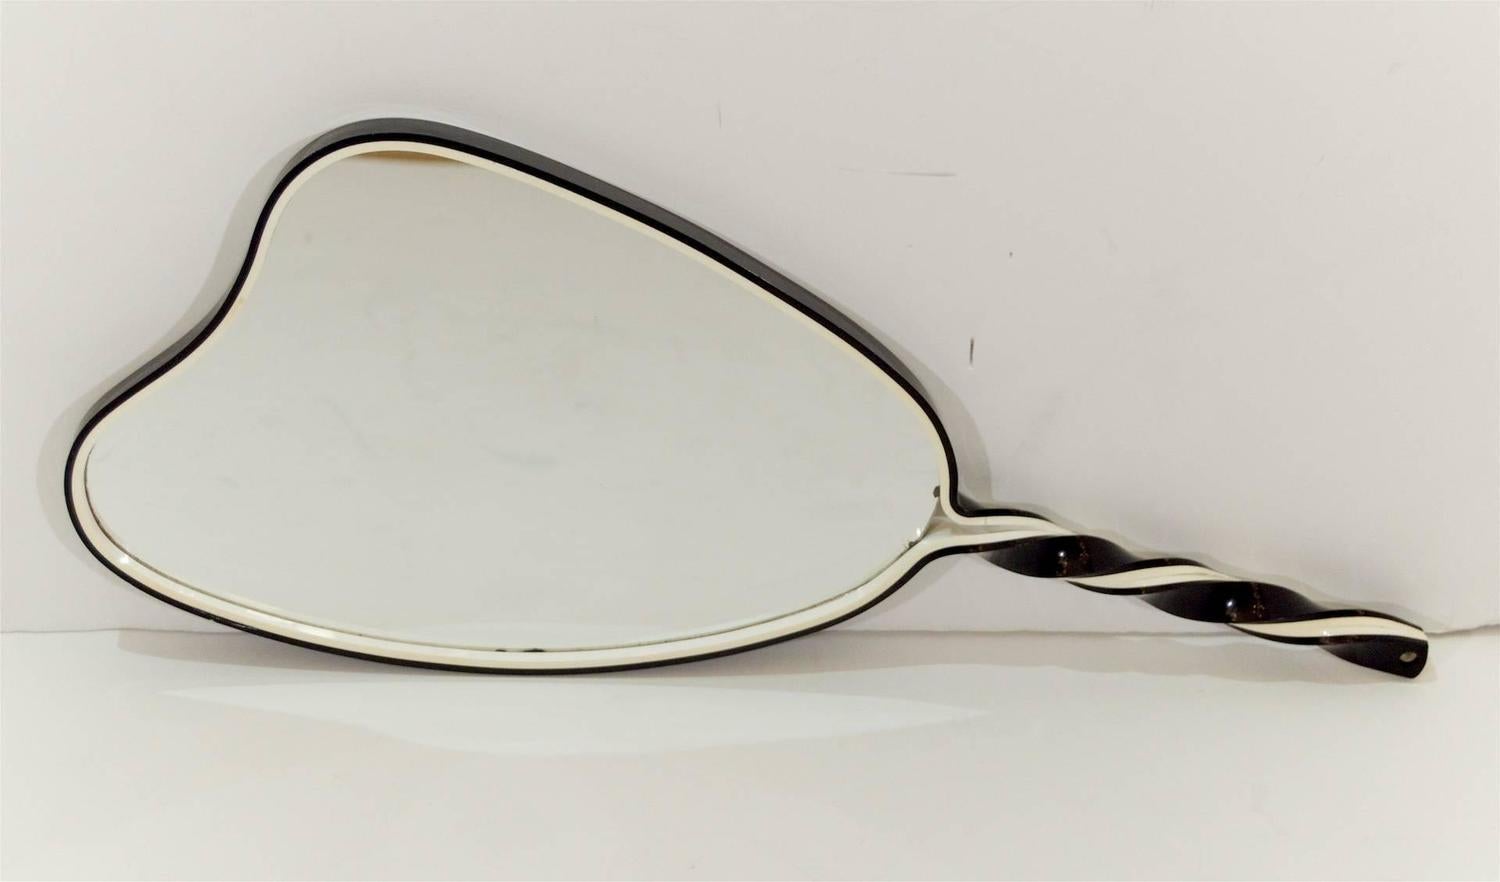 Beautifully formed black and white plexiglass mirror hand mirror, the layers of acrylic twisting to form the handle.